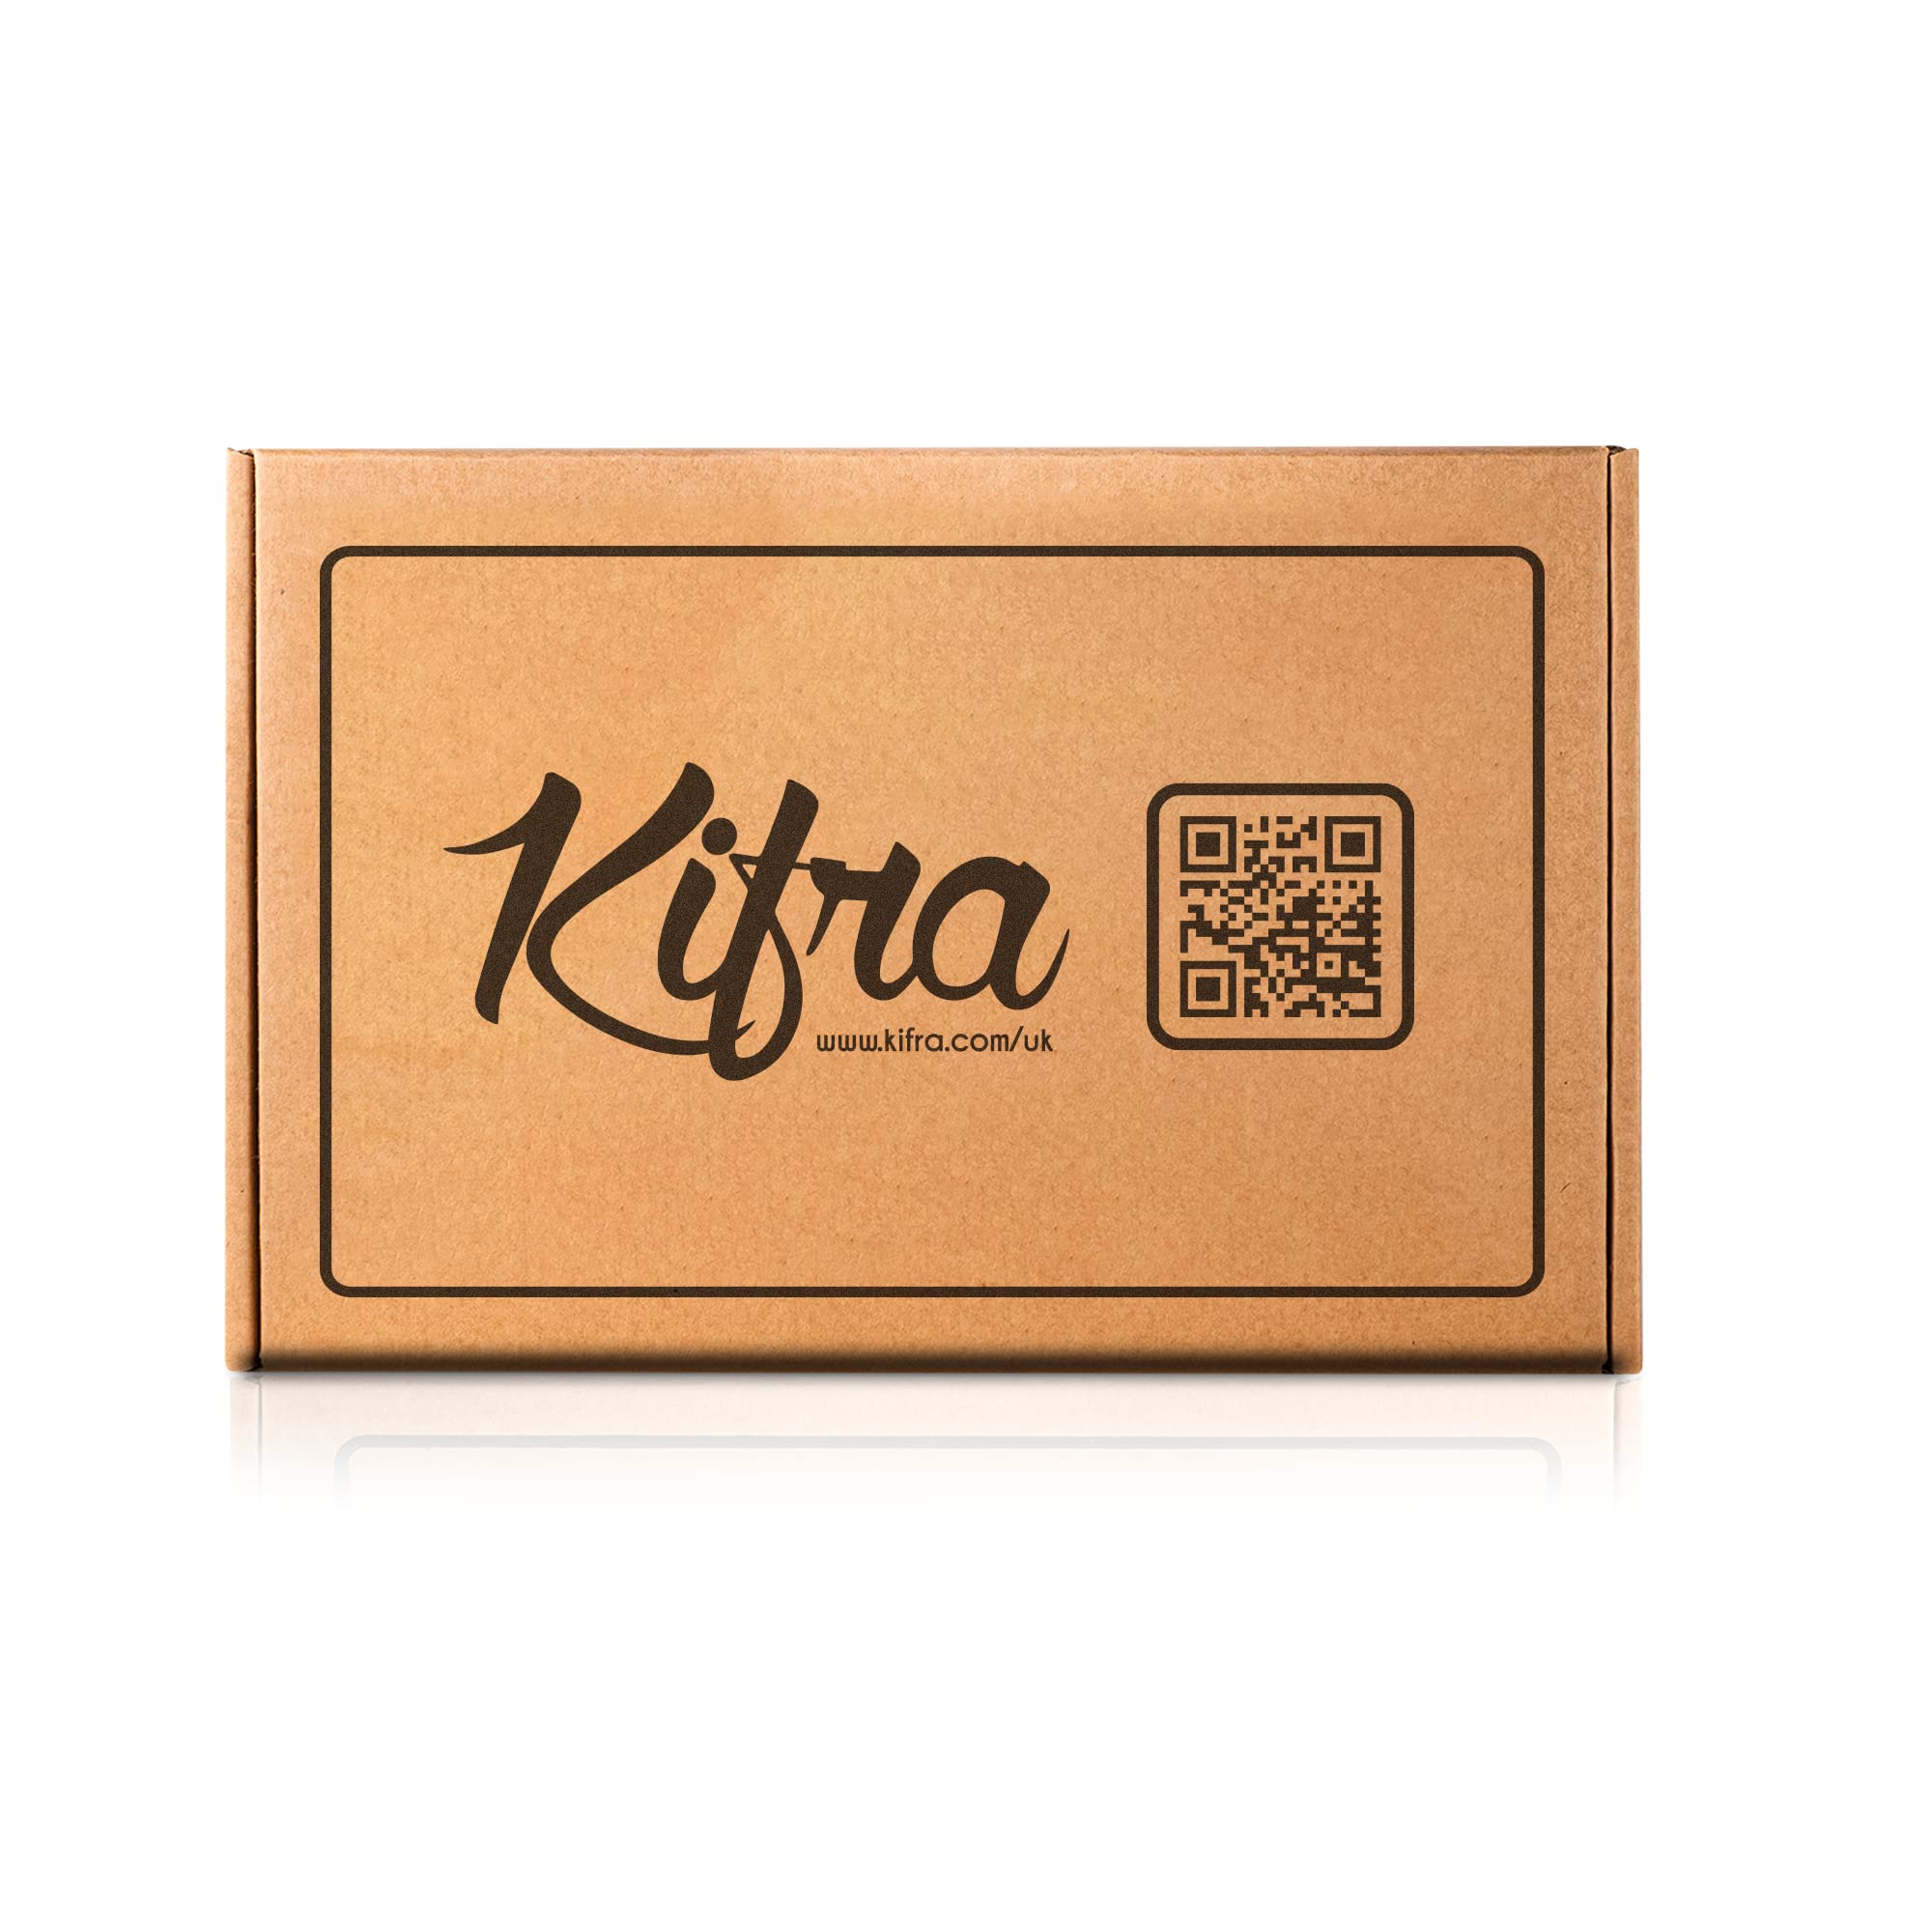 KIFRA Concentrated Laundry Fragrance Box of 5 Minidoses Spring